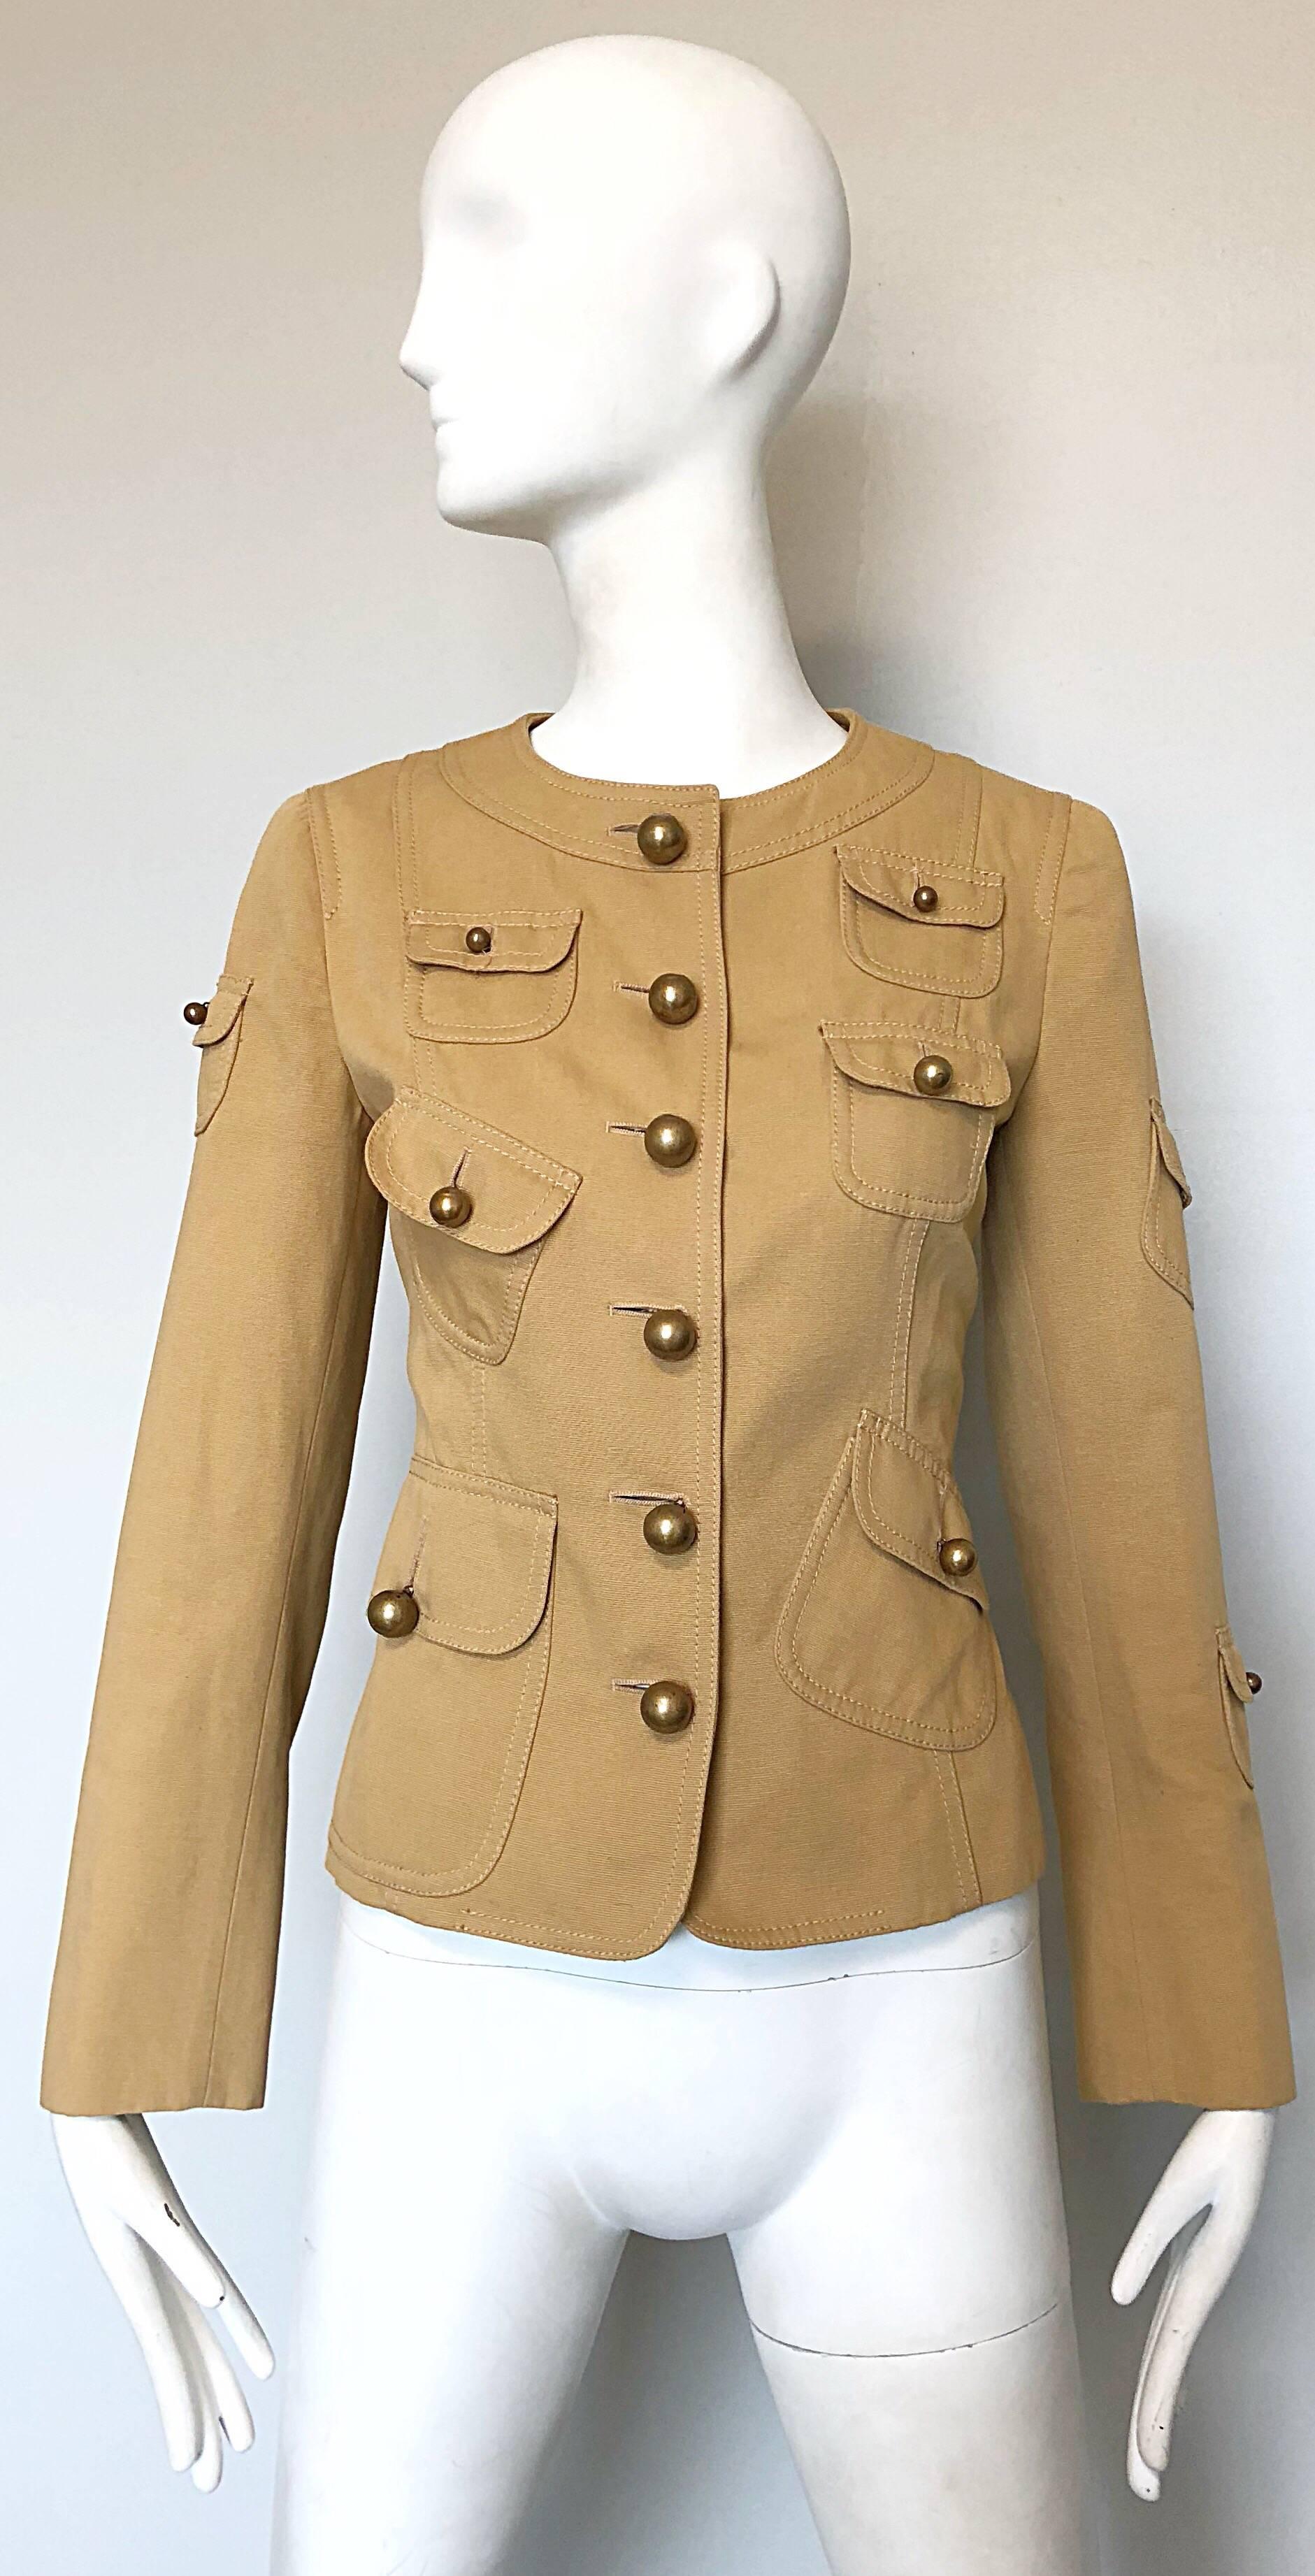 Vintage Moschino Cheap & Chic 1990s Size 6 Khaki Cotton Military Inspired Jacket For Sale 1